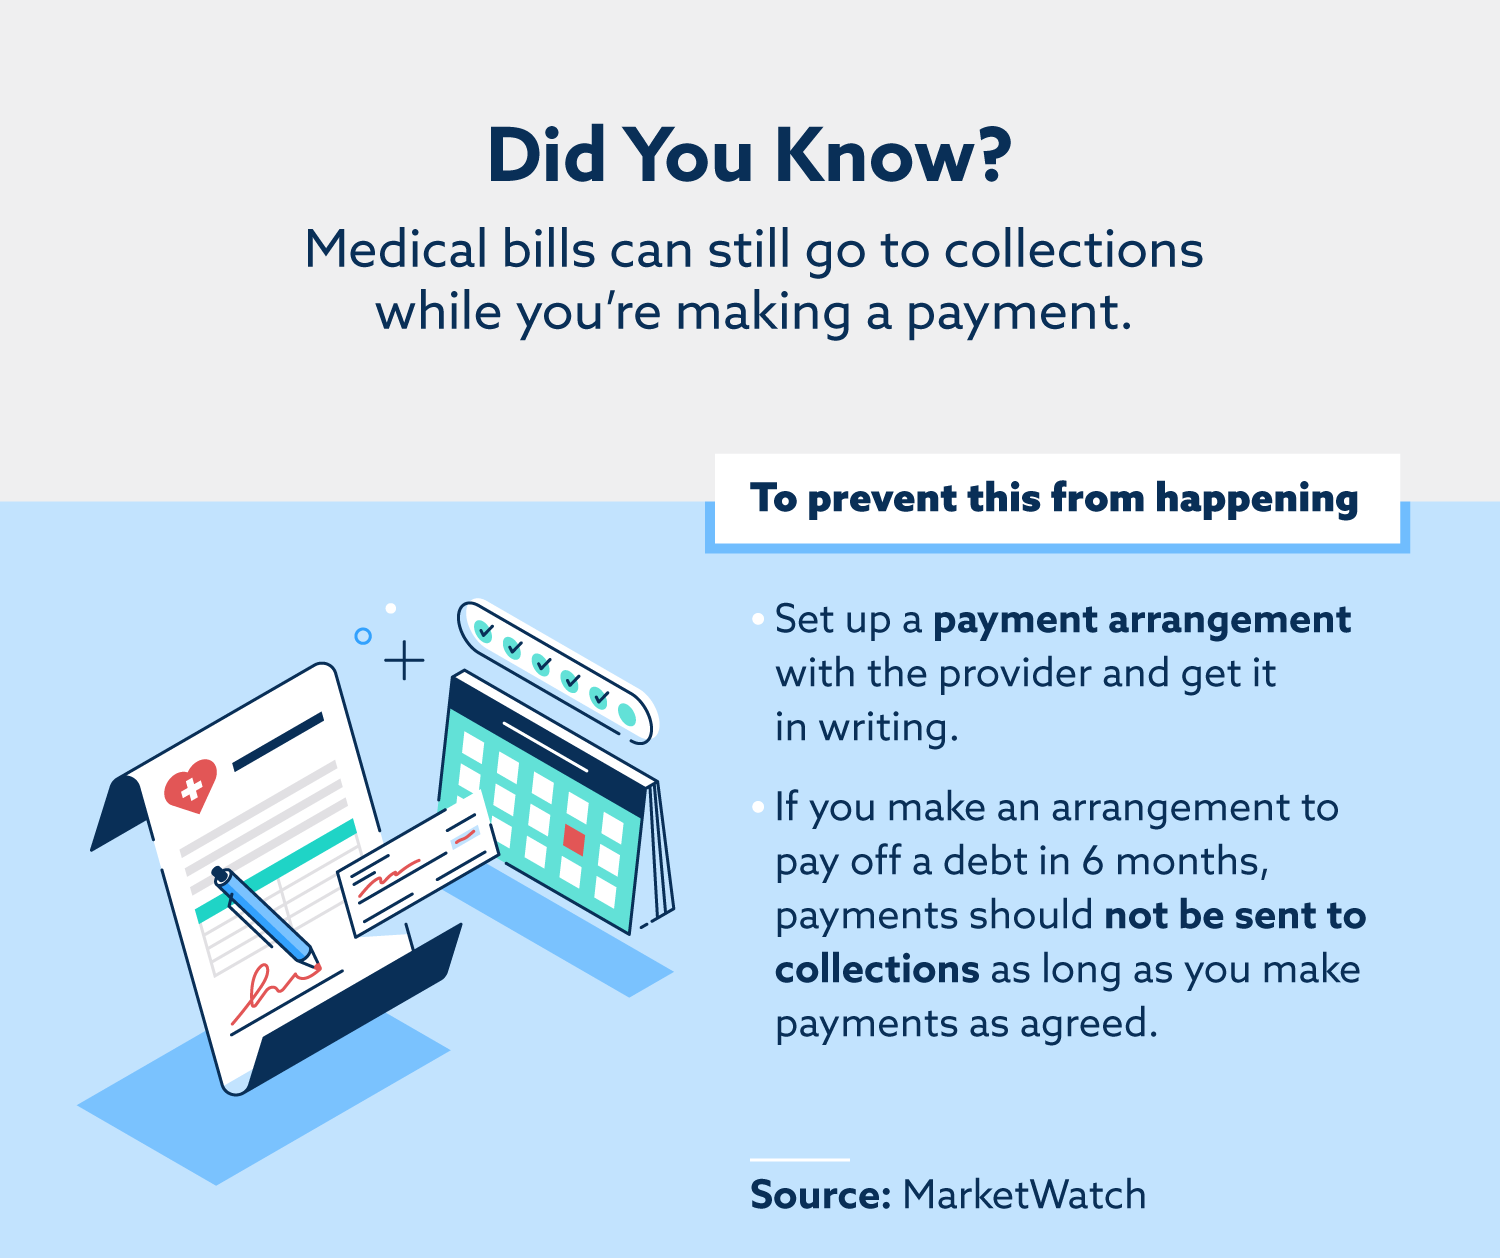 how to prevent medical bills from going to collections